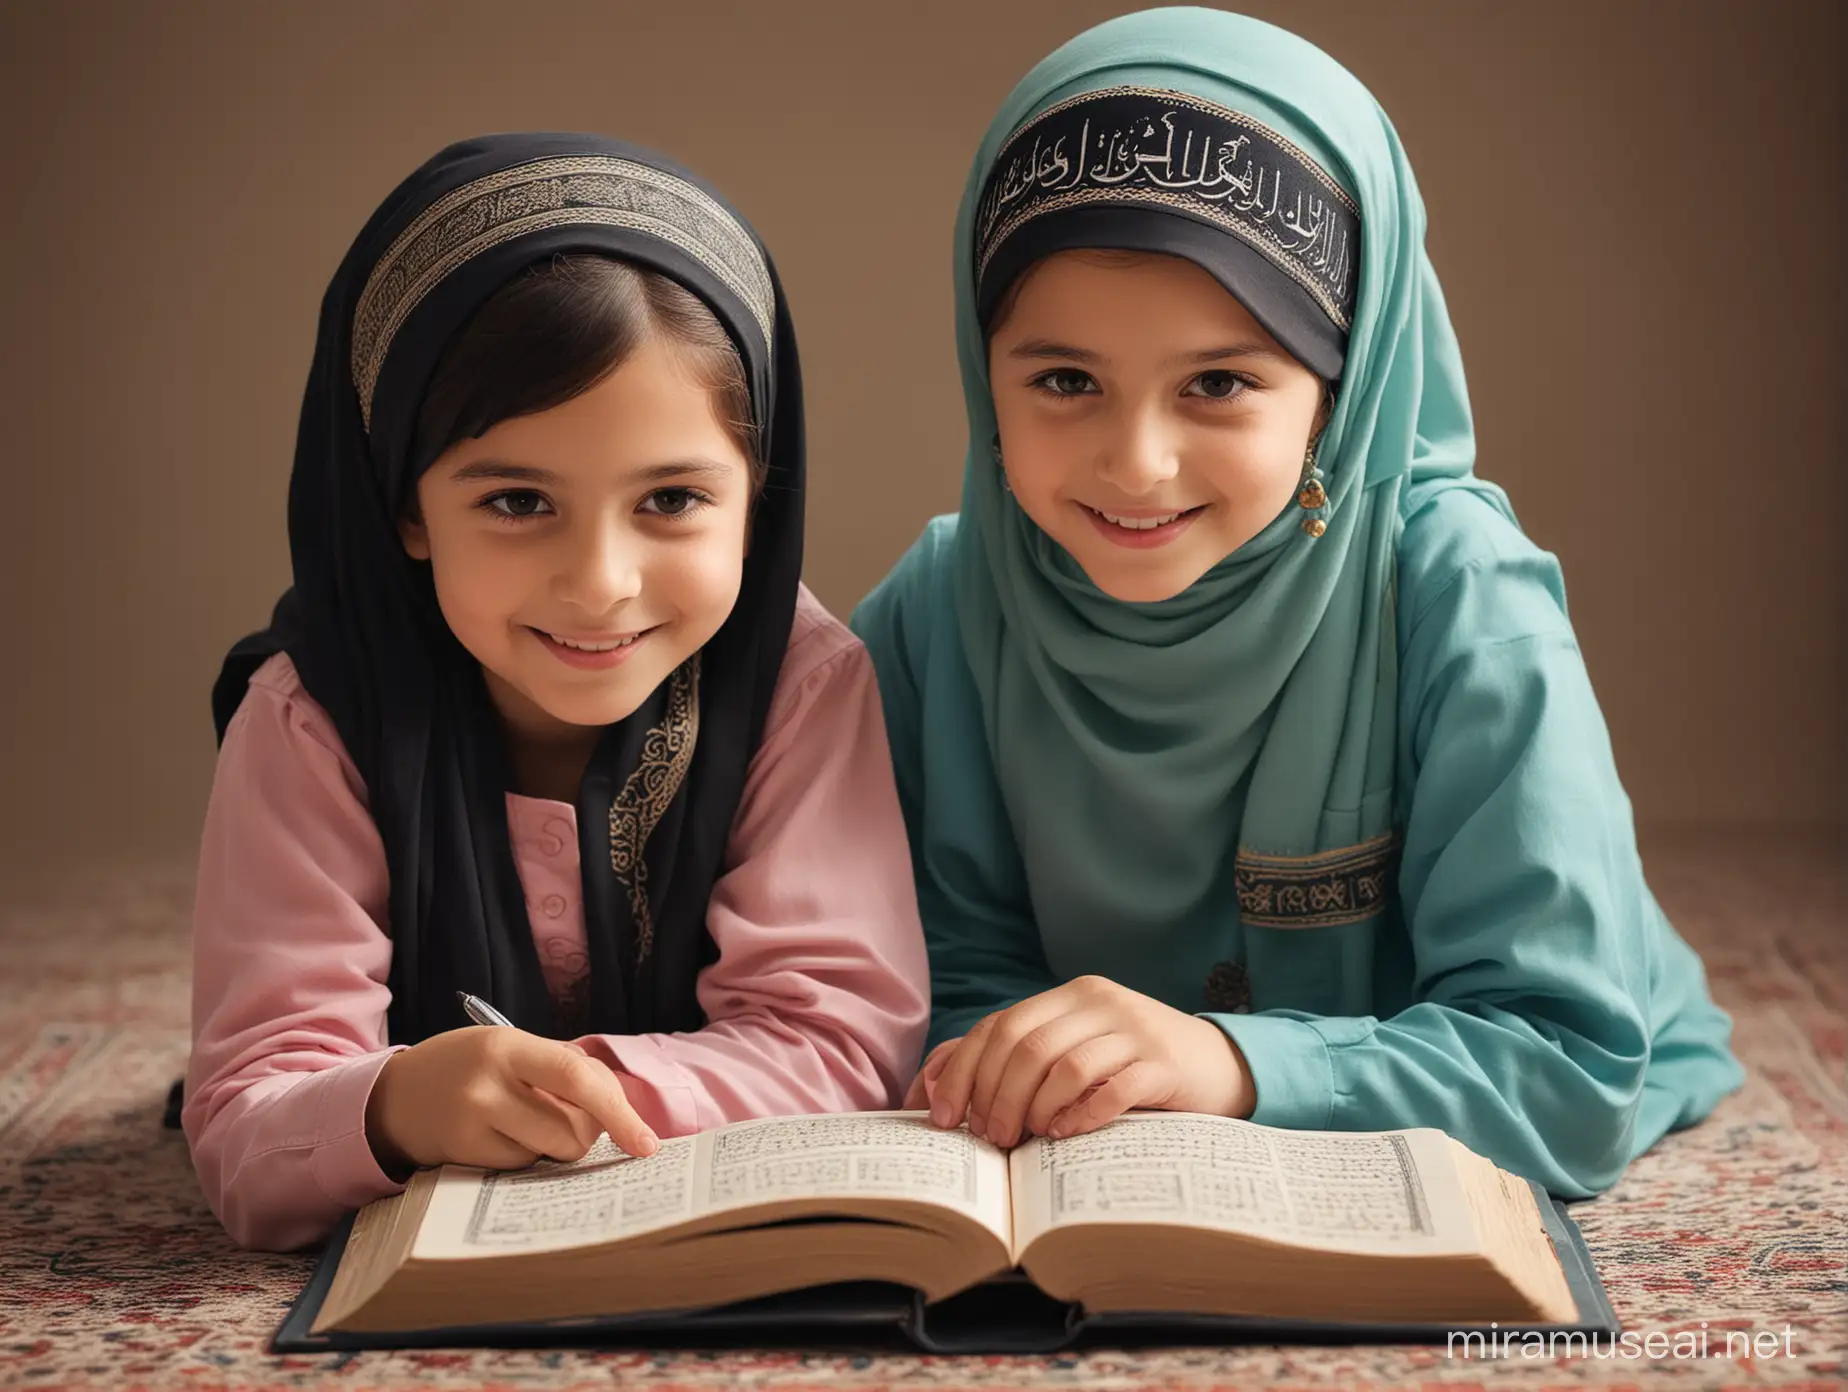 Online Quran lessons for kids
Boy  with cap and Girl  both using Quran